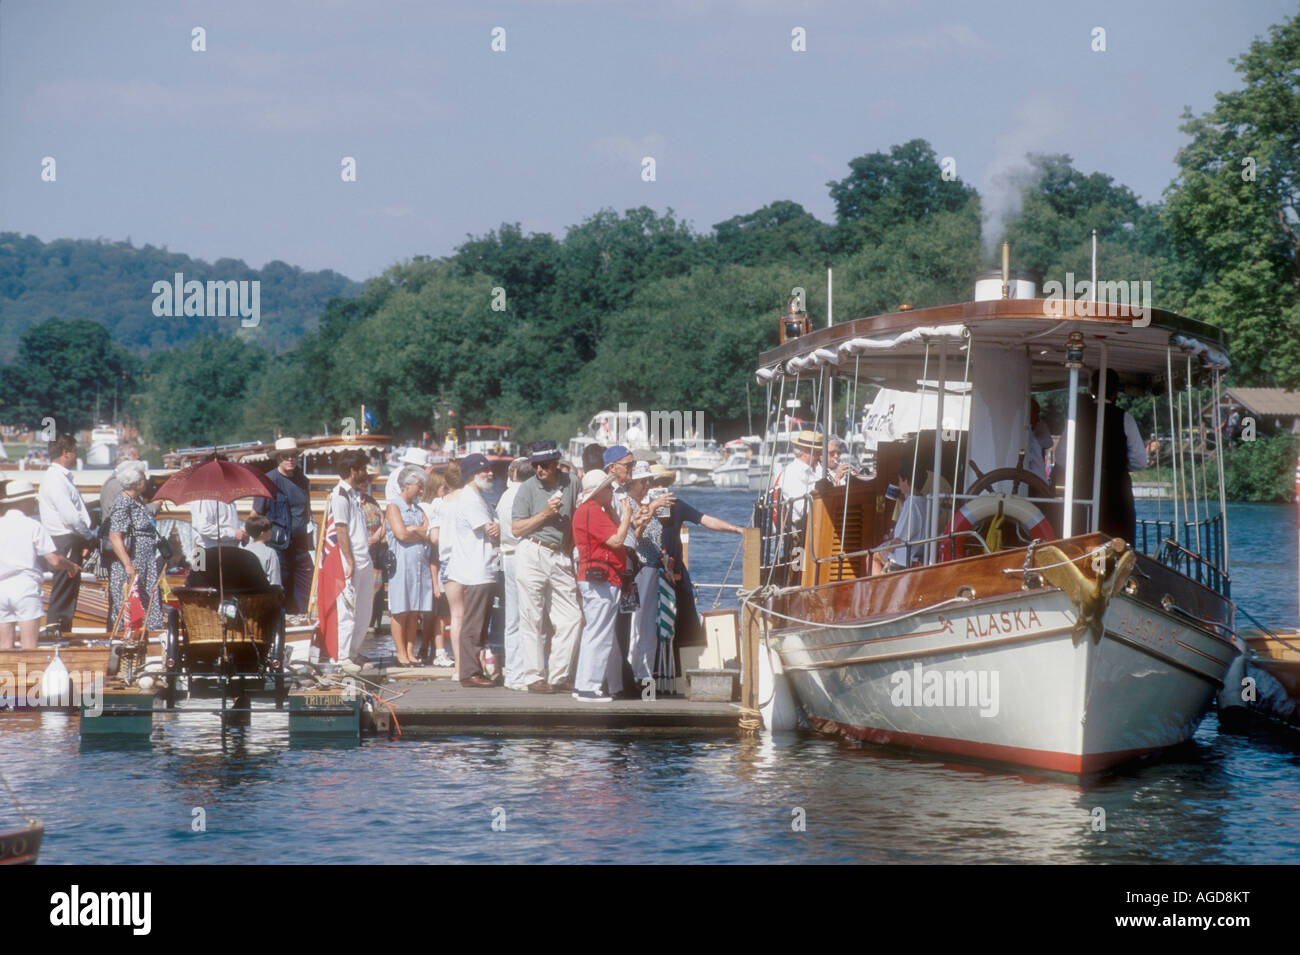 People board the restored 1883 Horsham and Co steam boat Alaska at the Thames Traditional Boat Rally Henley England UK Stock Photo